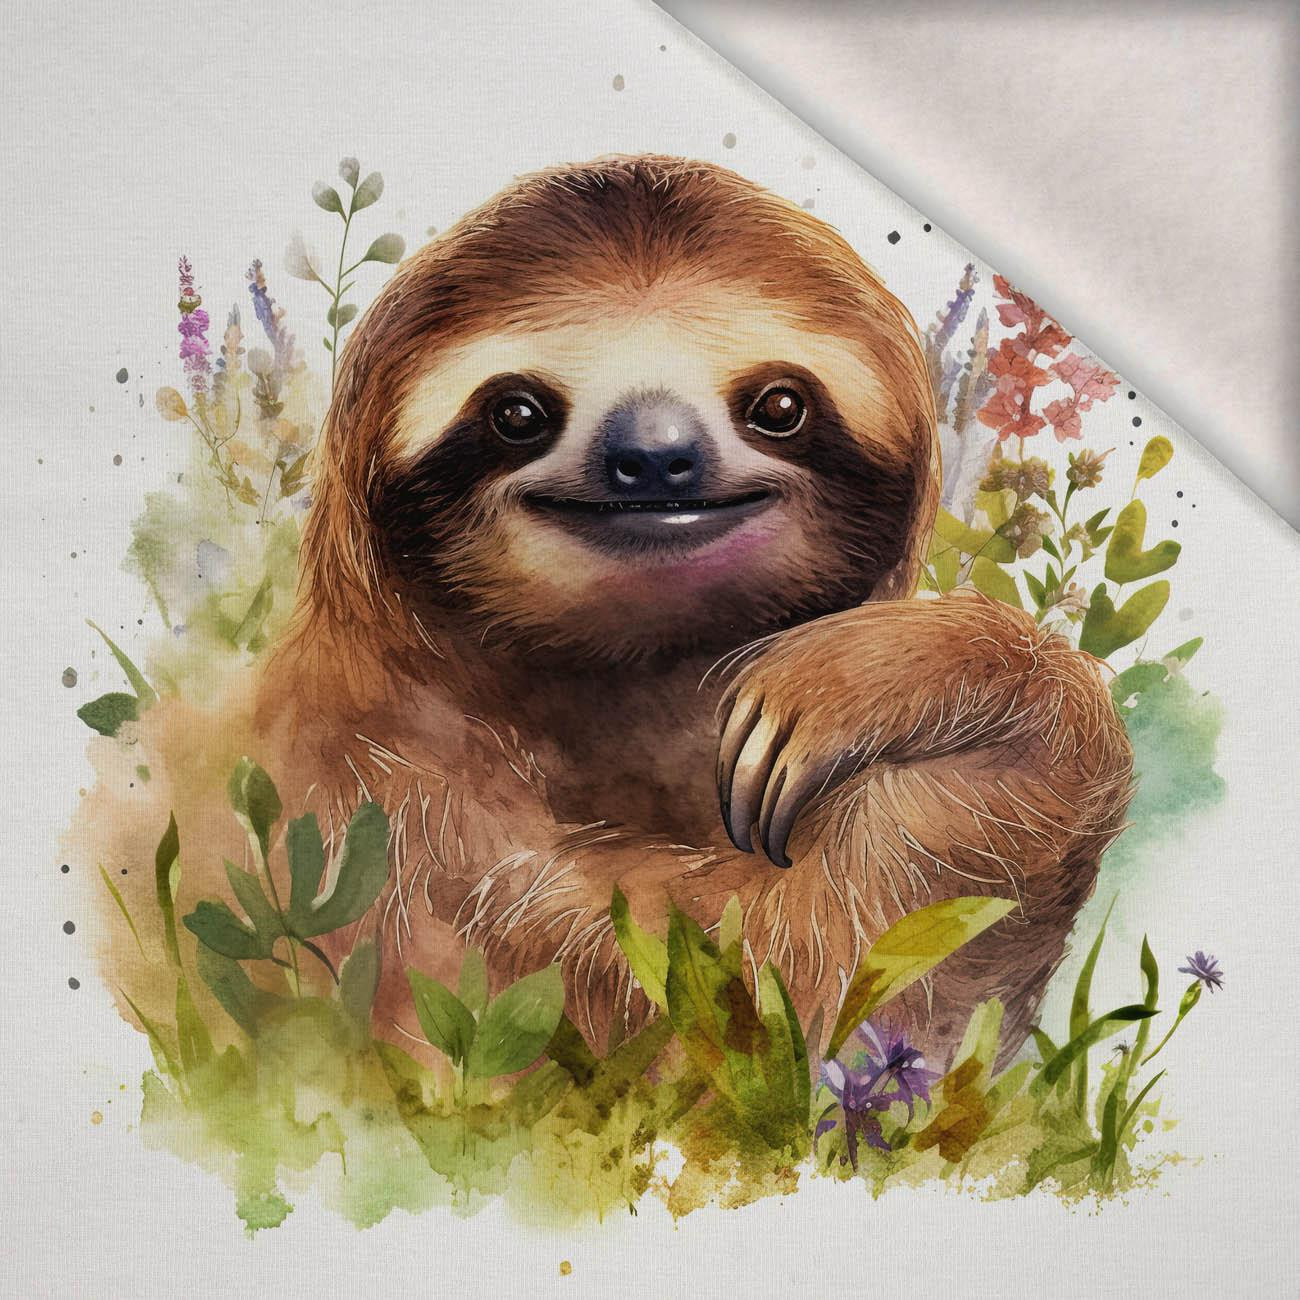 WATERCOLOR SLOTH PAT.2 - panel (75cm x 80cm) brushed knitwear with elastane ITY